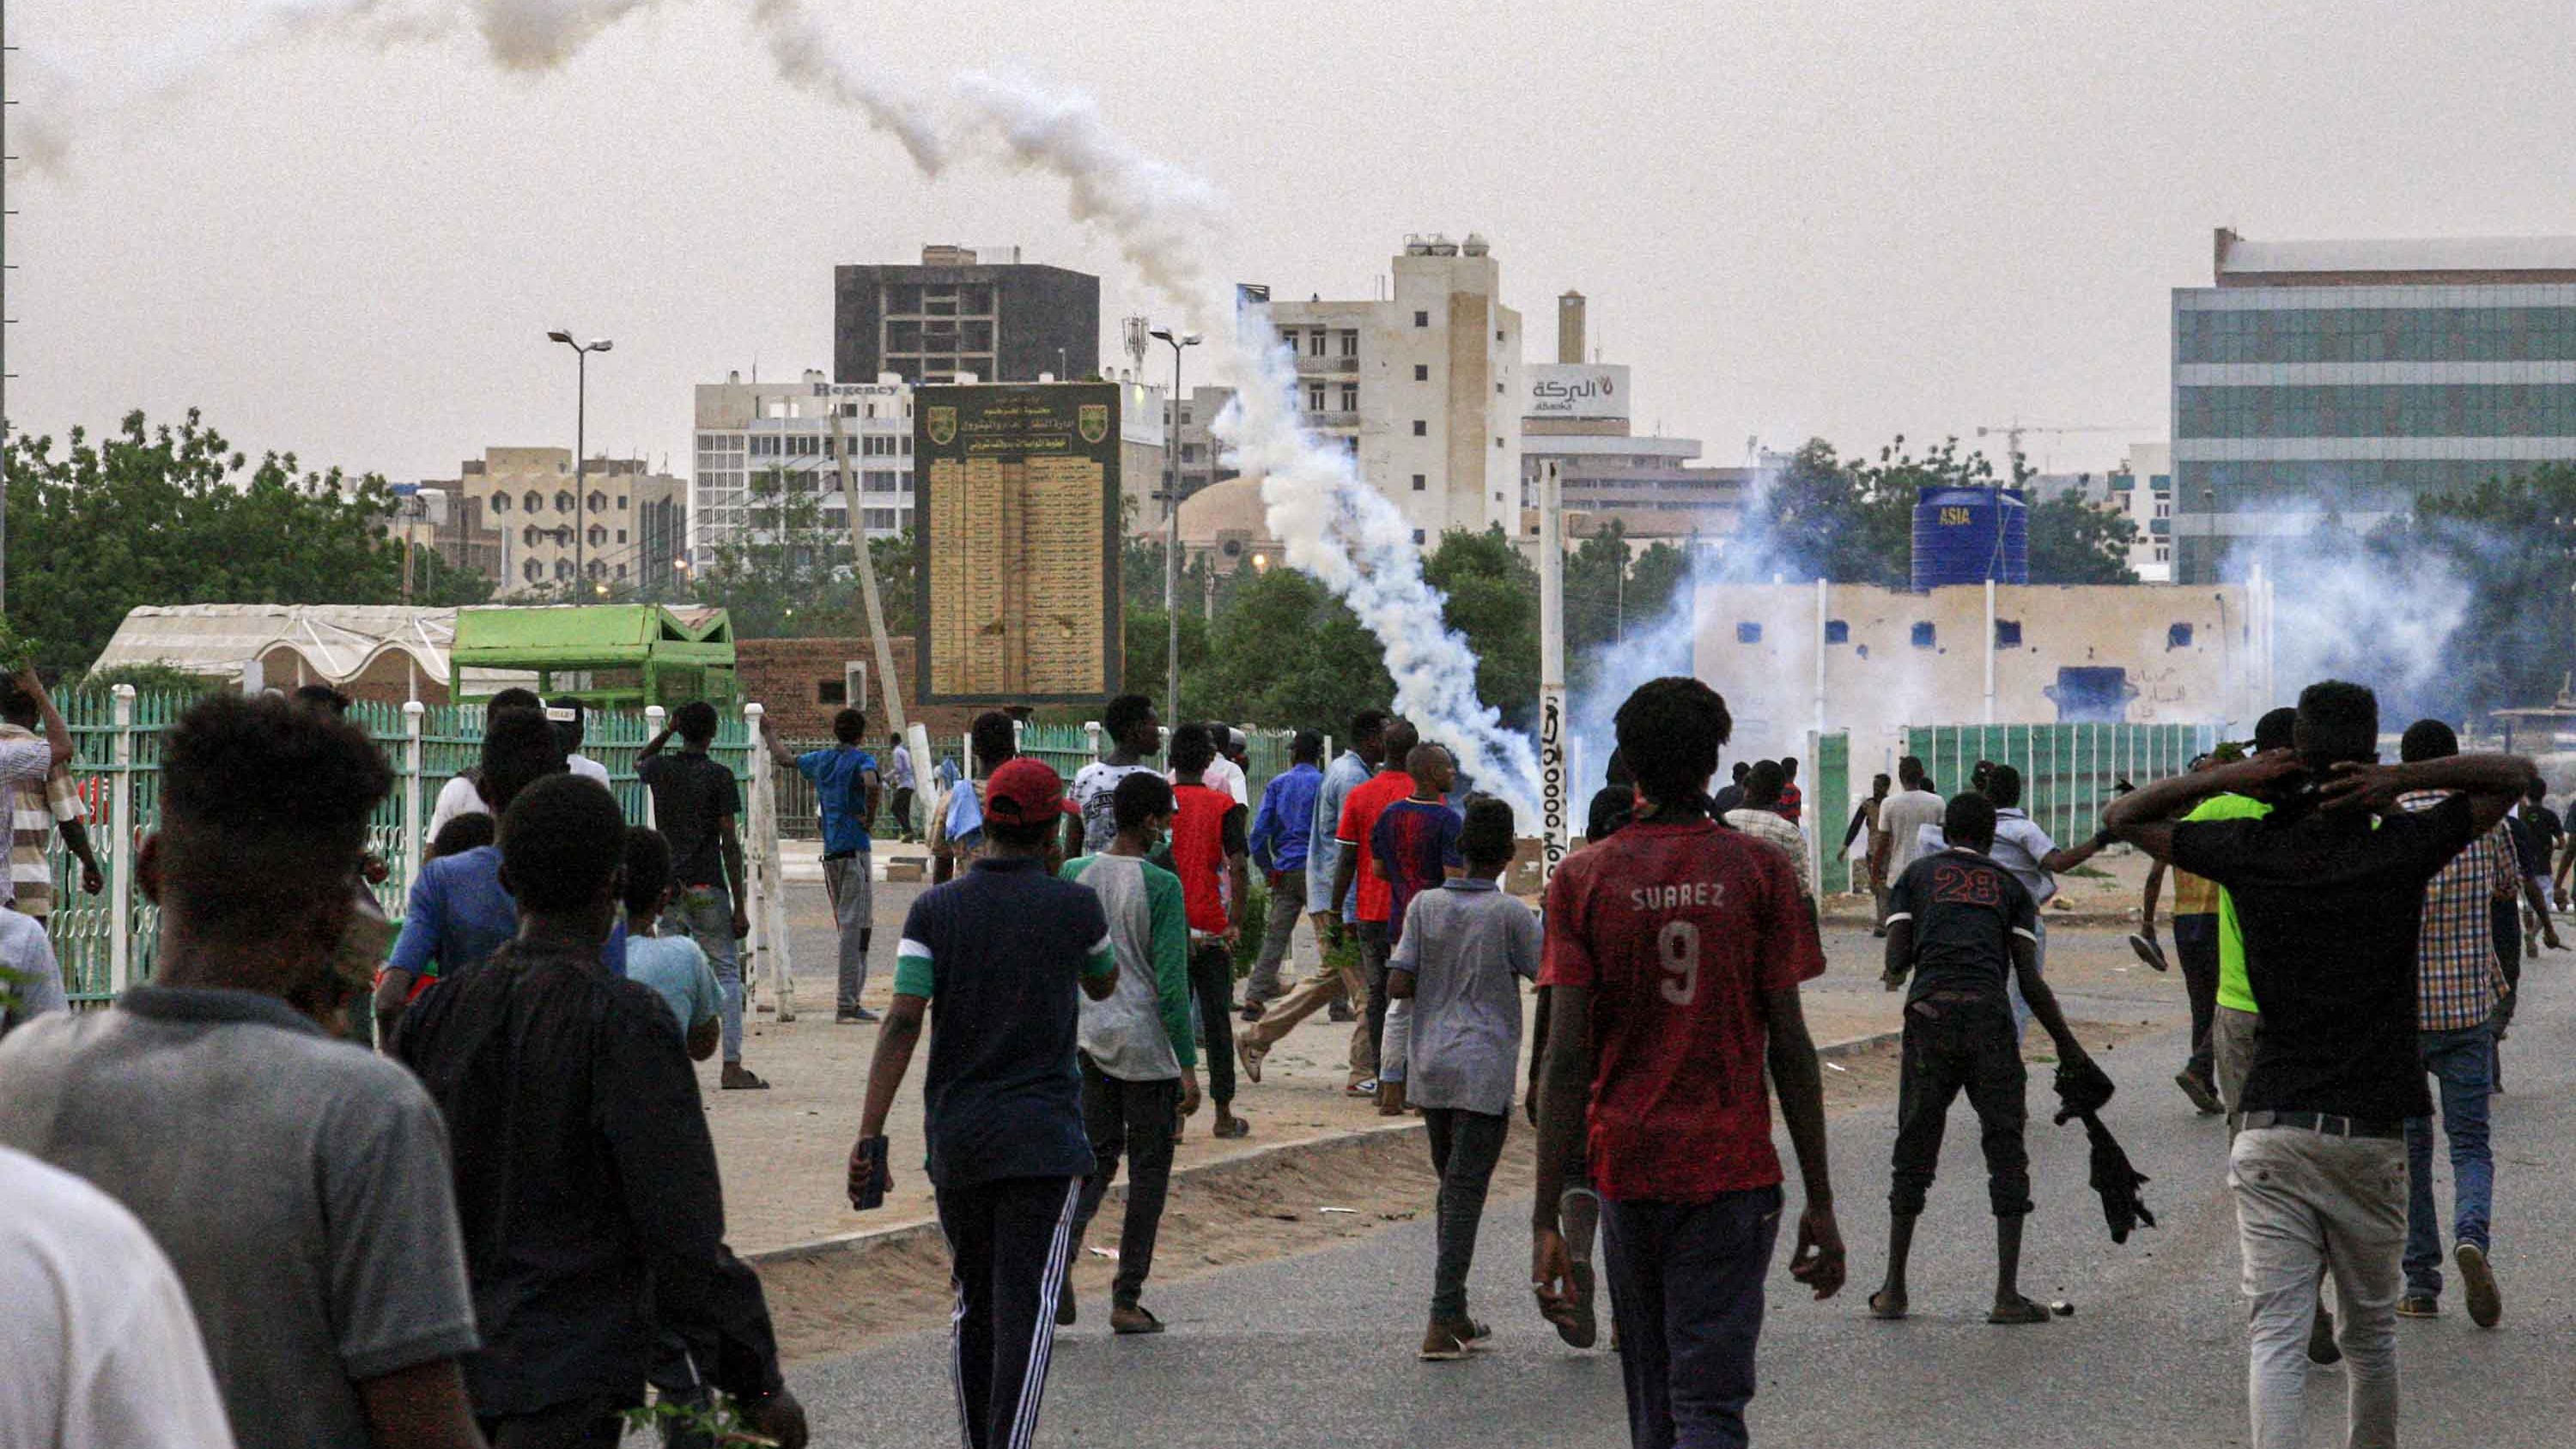 Tear gas fumes are seen amid a demonstration in Khartoum on June 30.